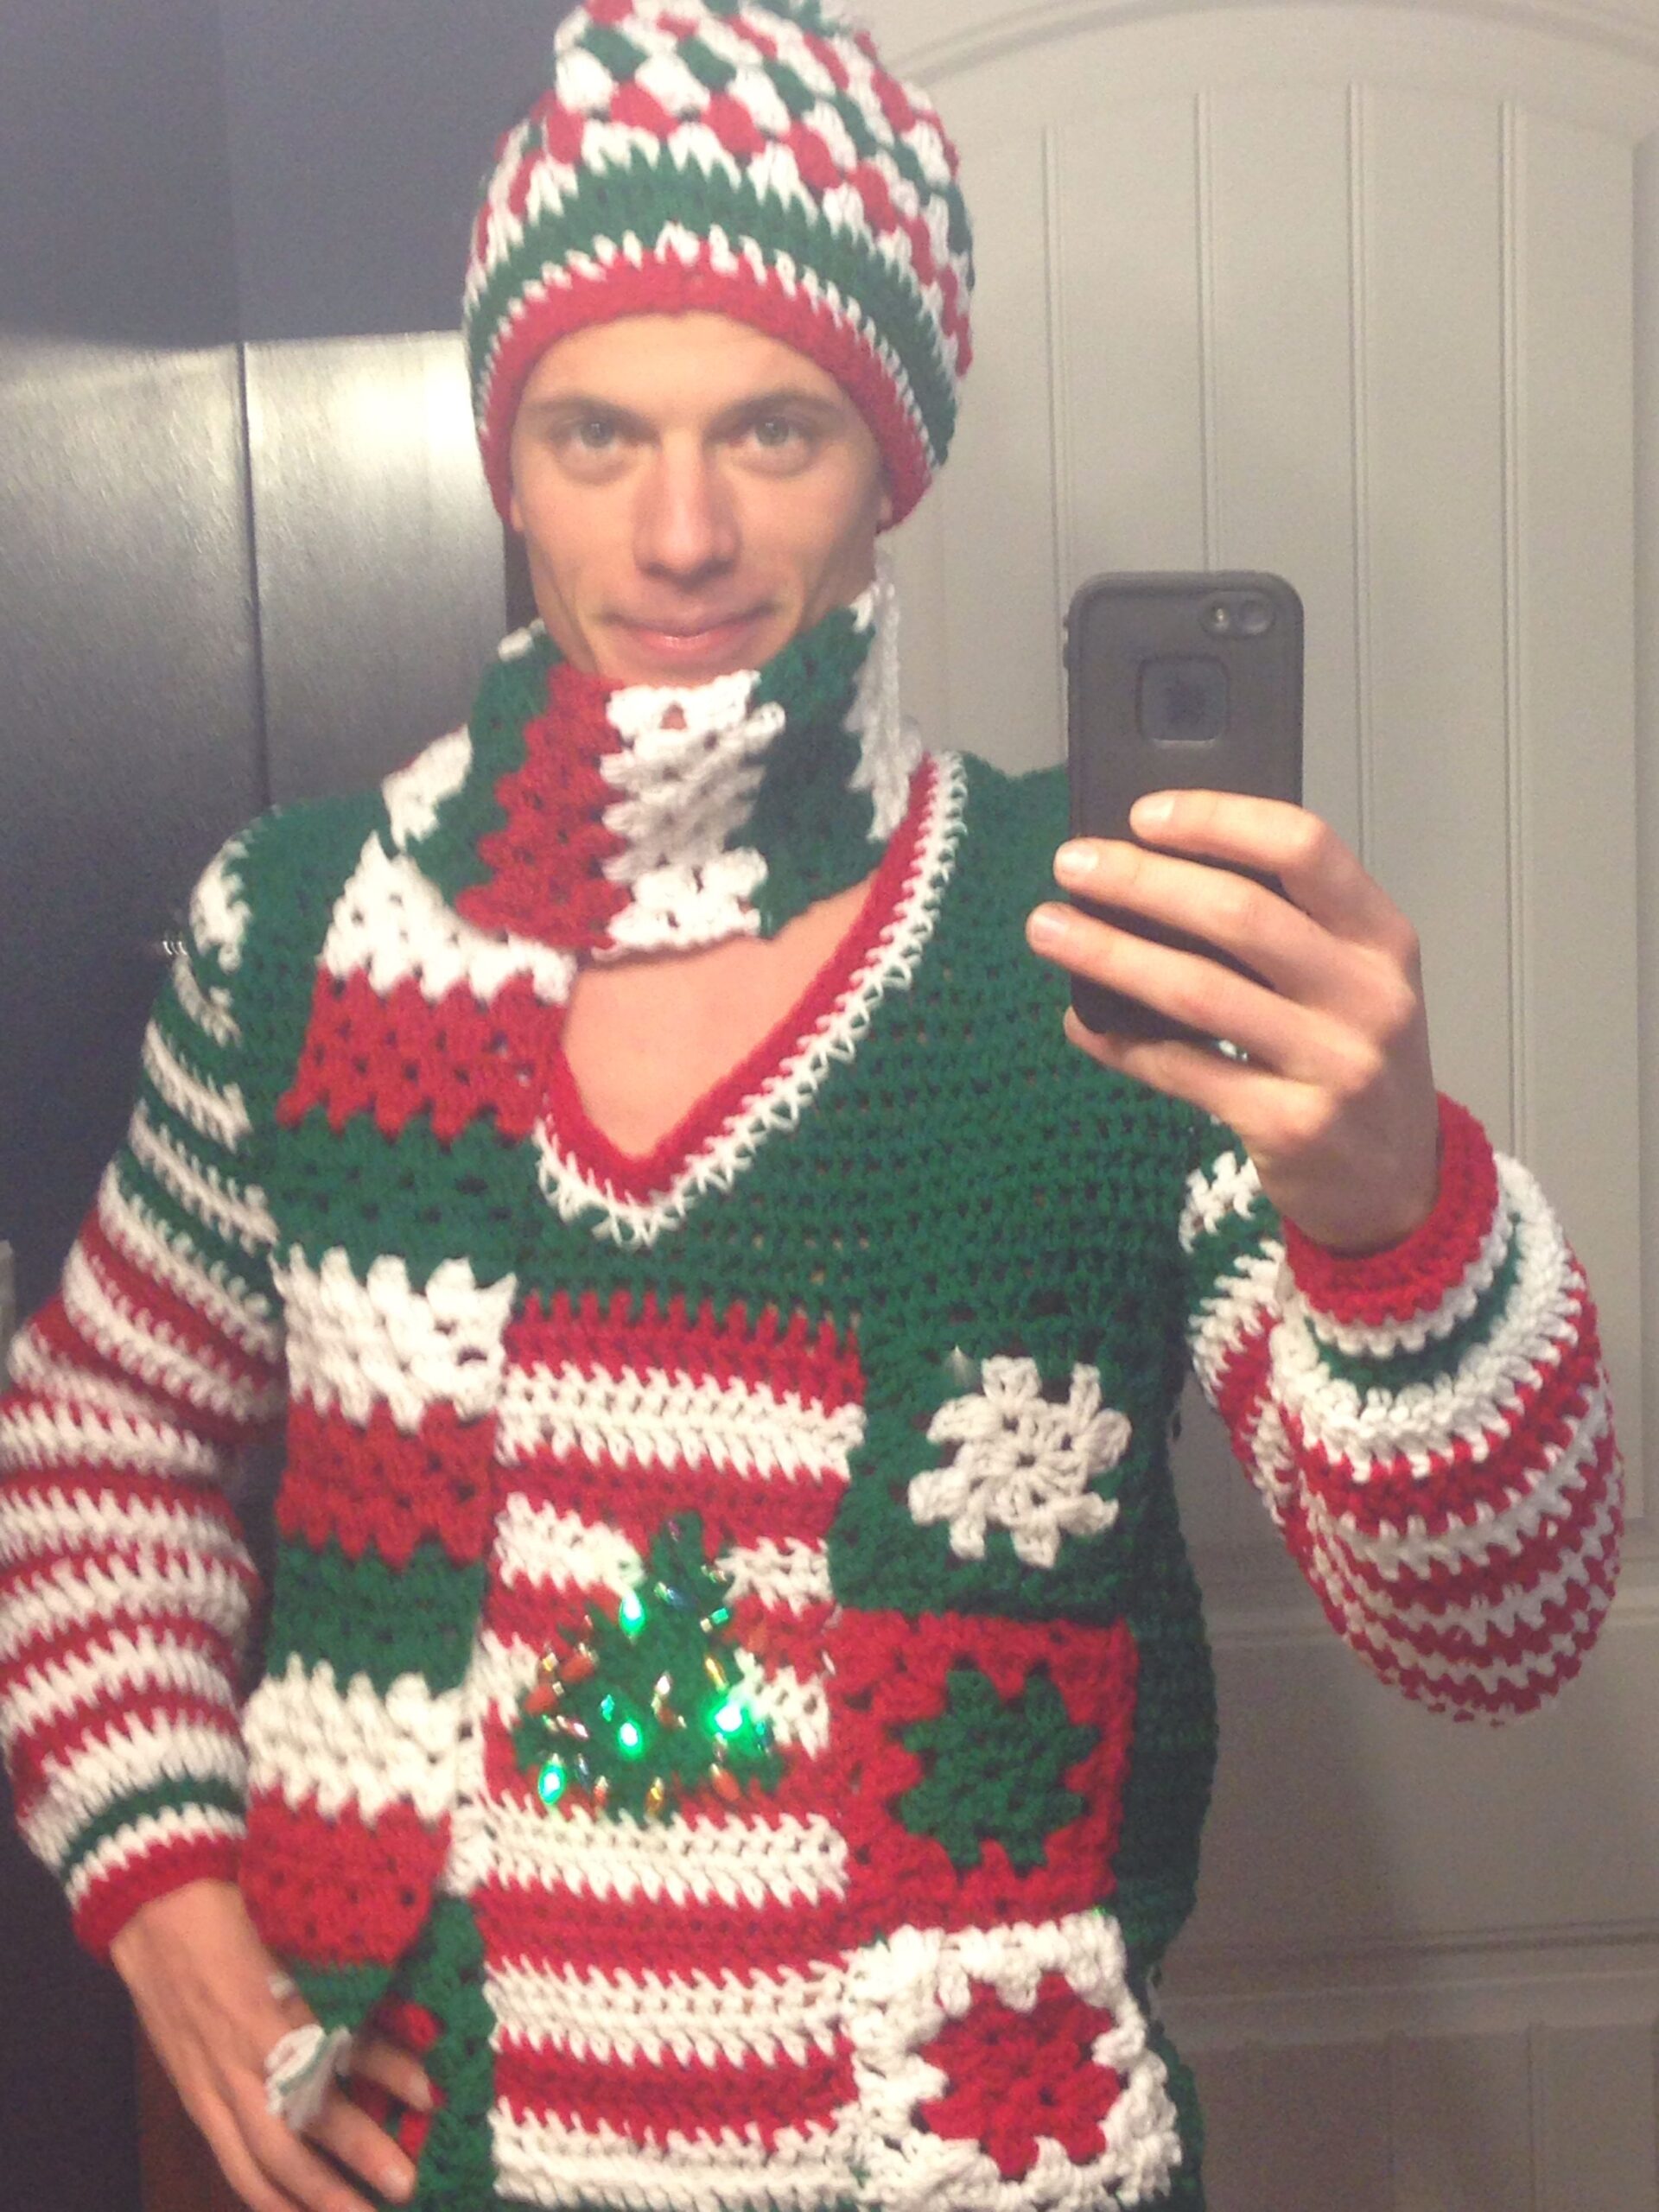 Christmas Ugly Sweater Ideas
  For Men